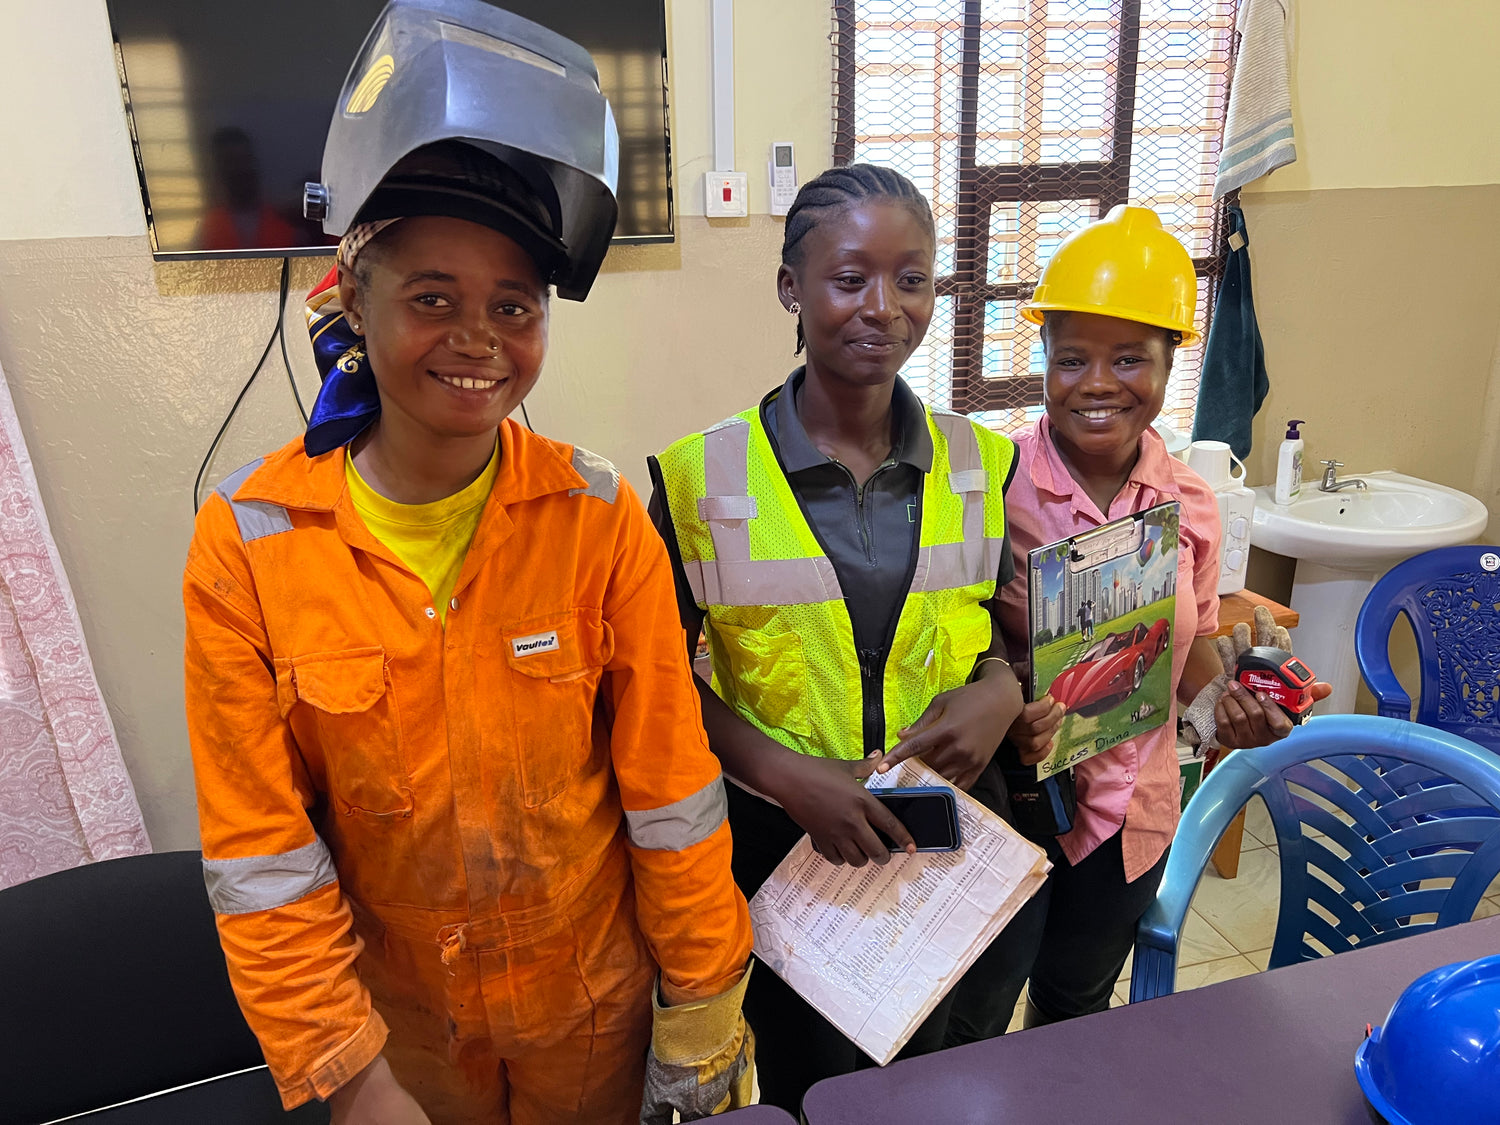 Marie, Hawa, and Success--three members of the construction team building a world-class maternal care center in Sierra Leone thanks to your support